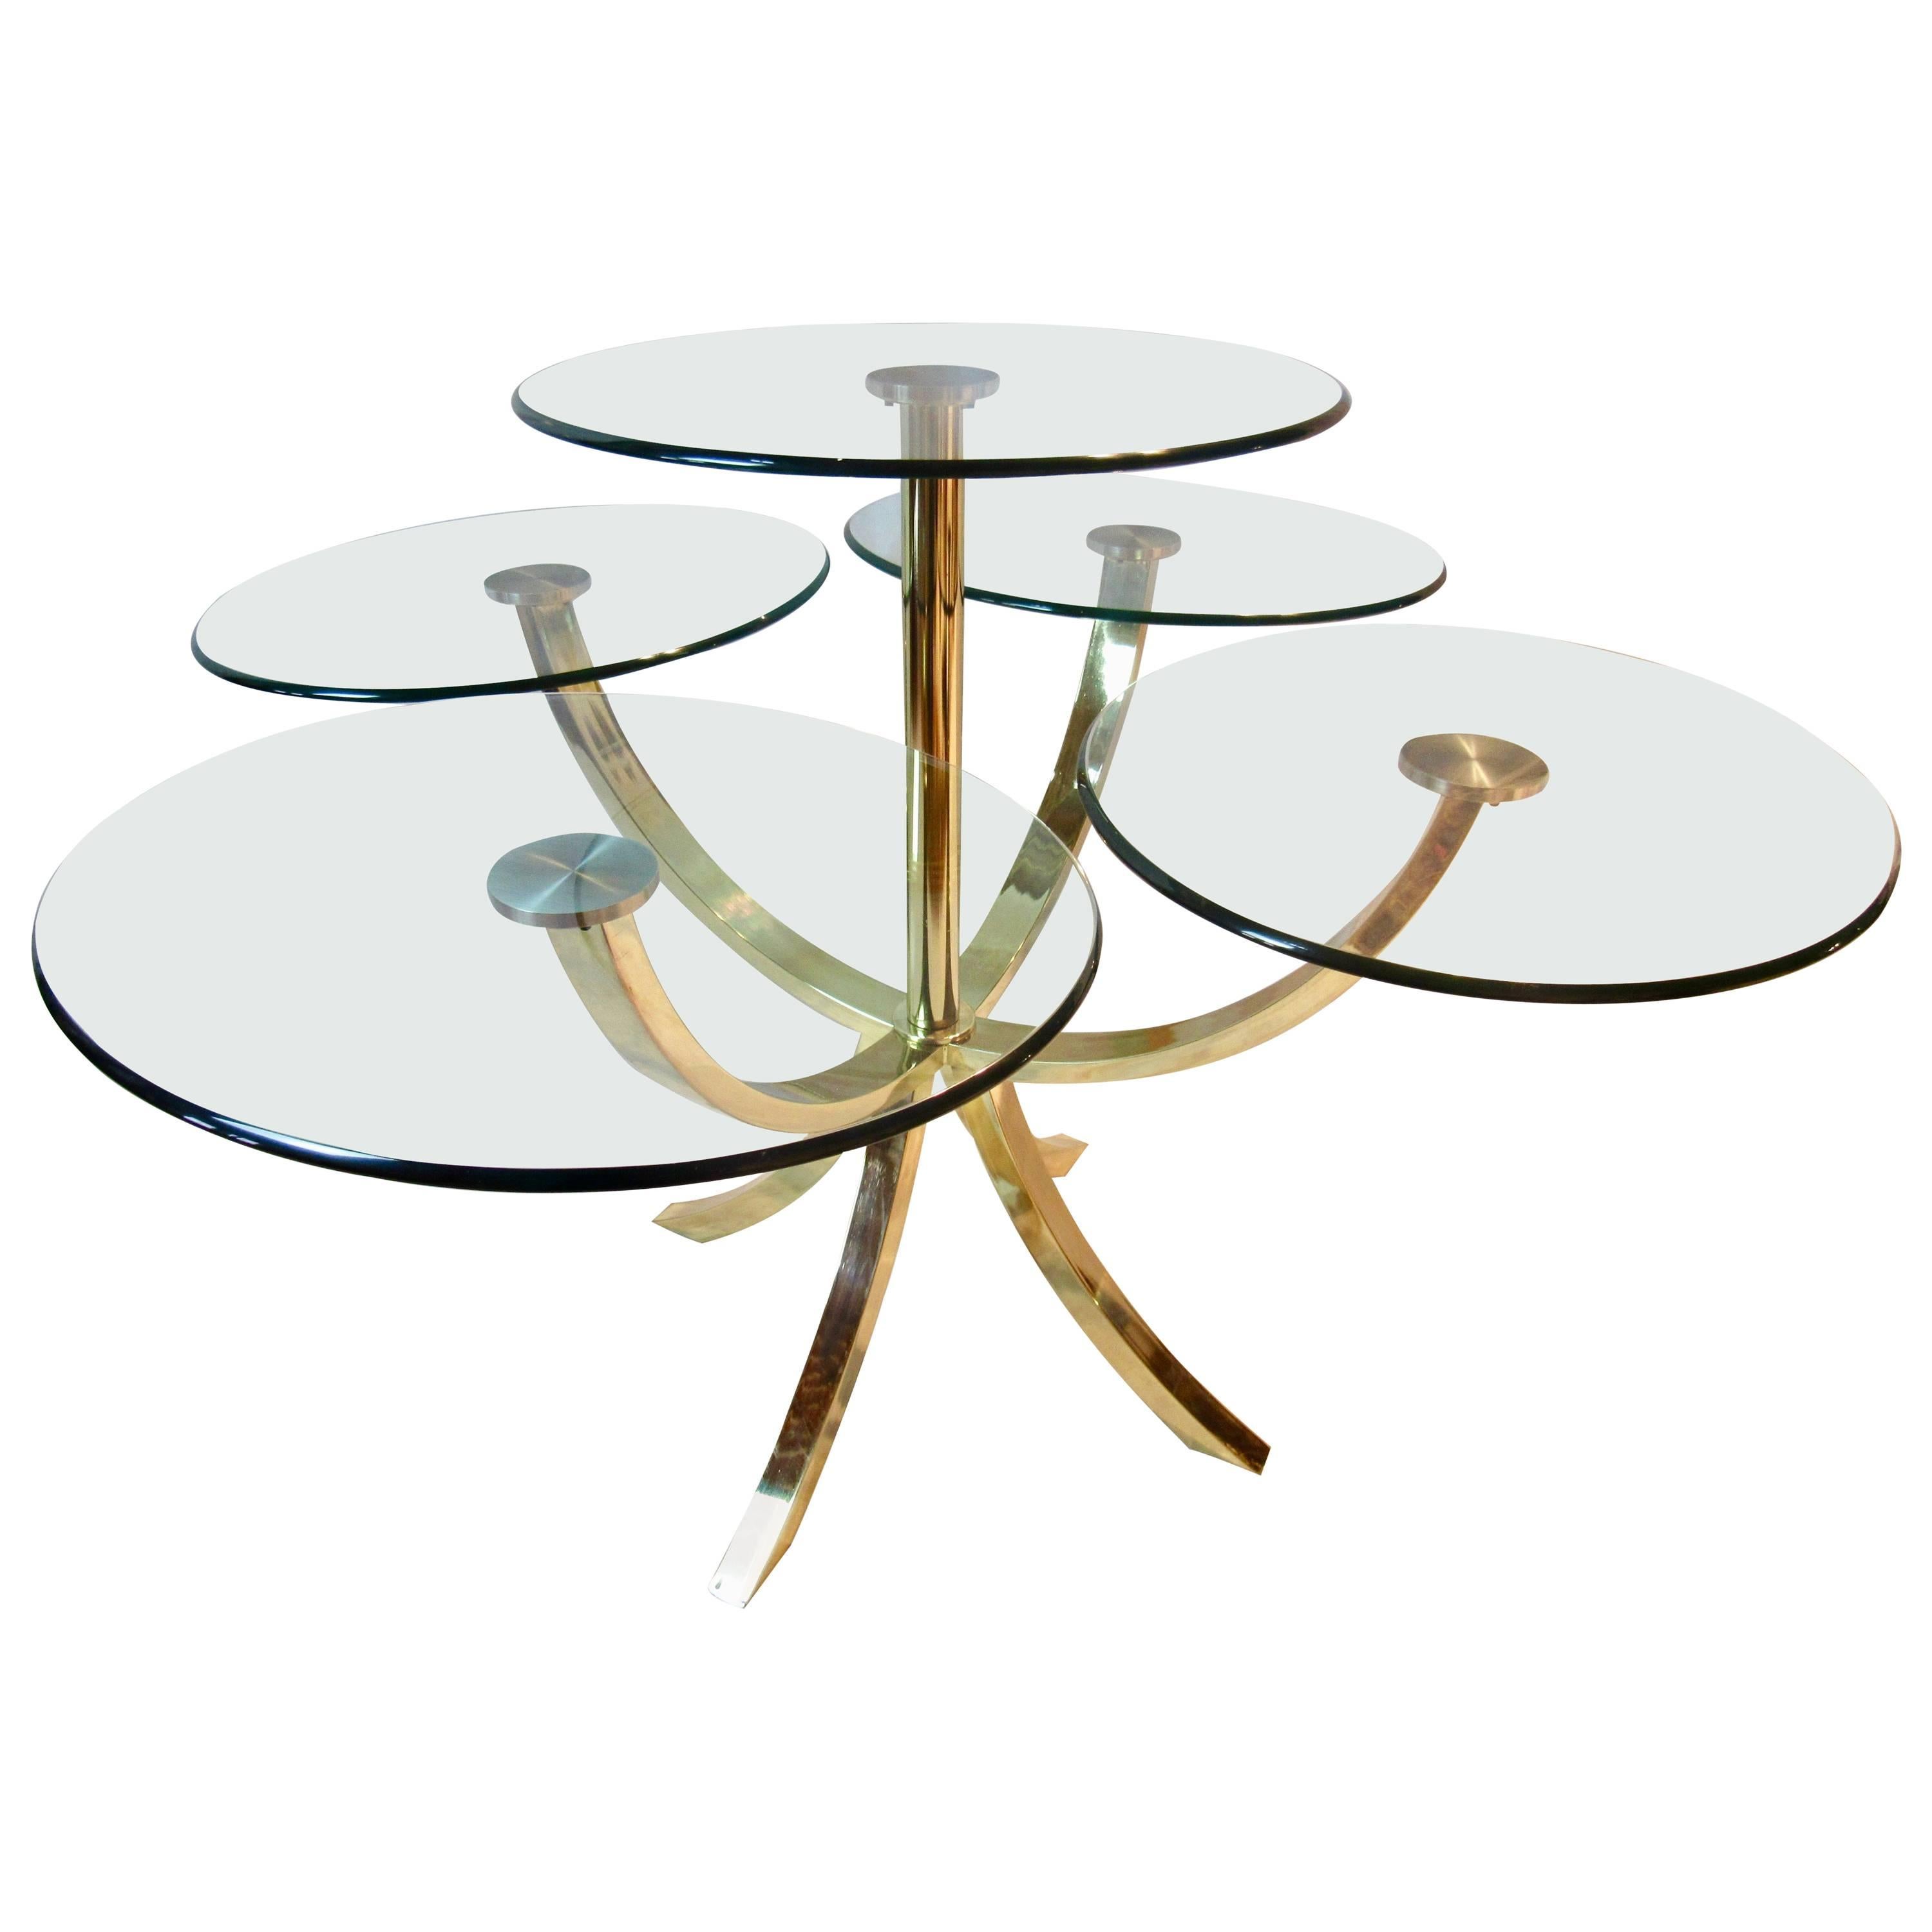 A Design Institute of America brass and glass dining table for four  1970s.
The D. I. A. 